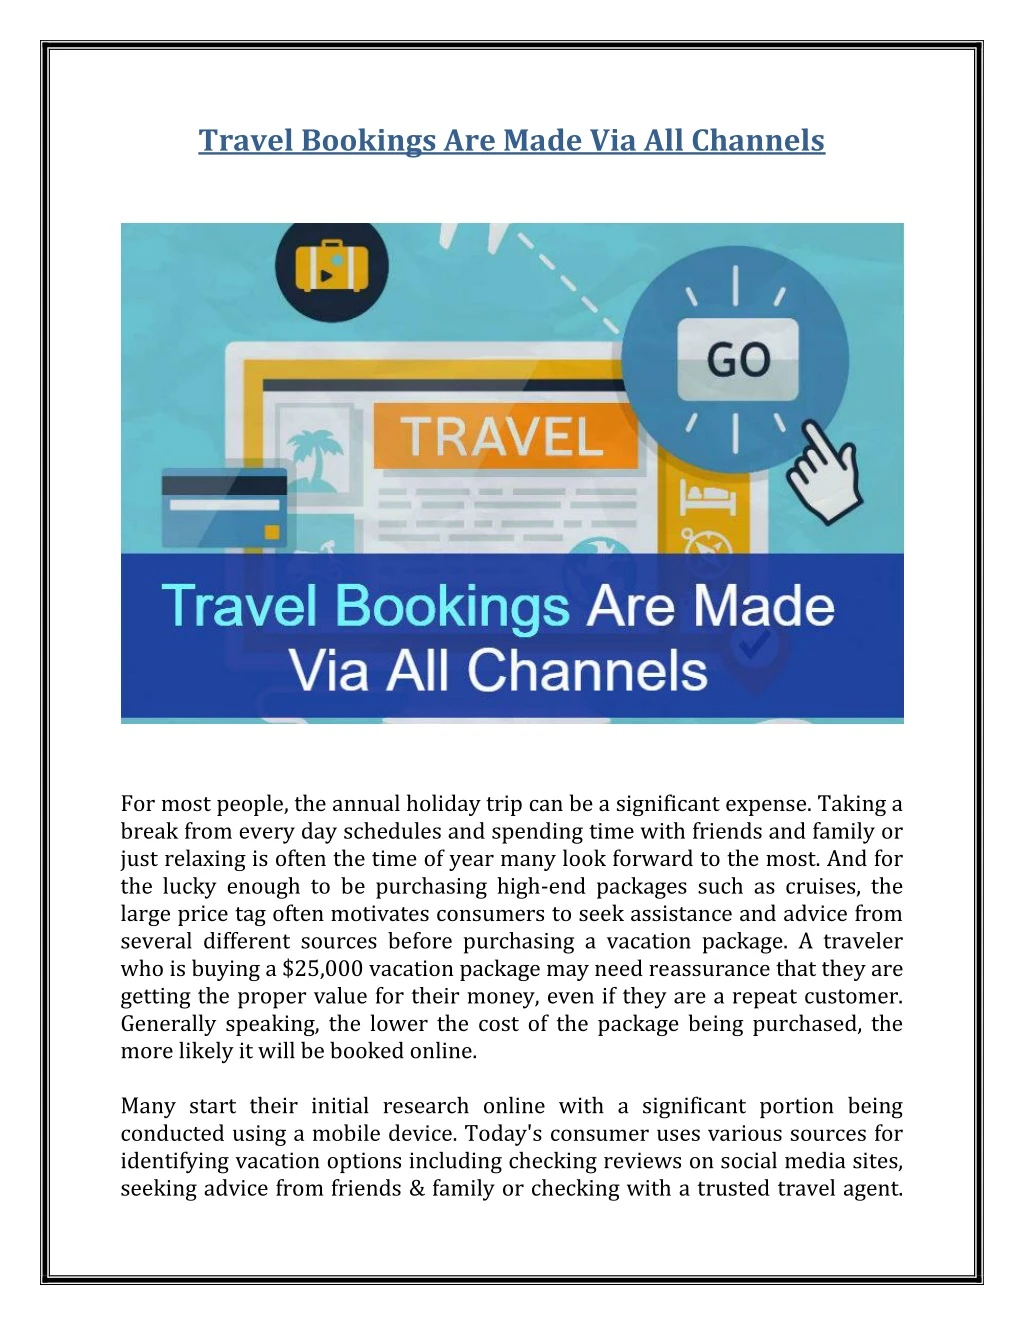 travel bookings are made via all channels